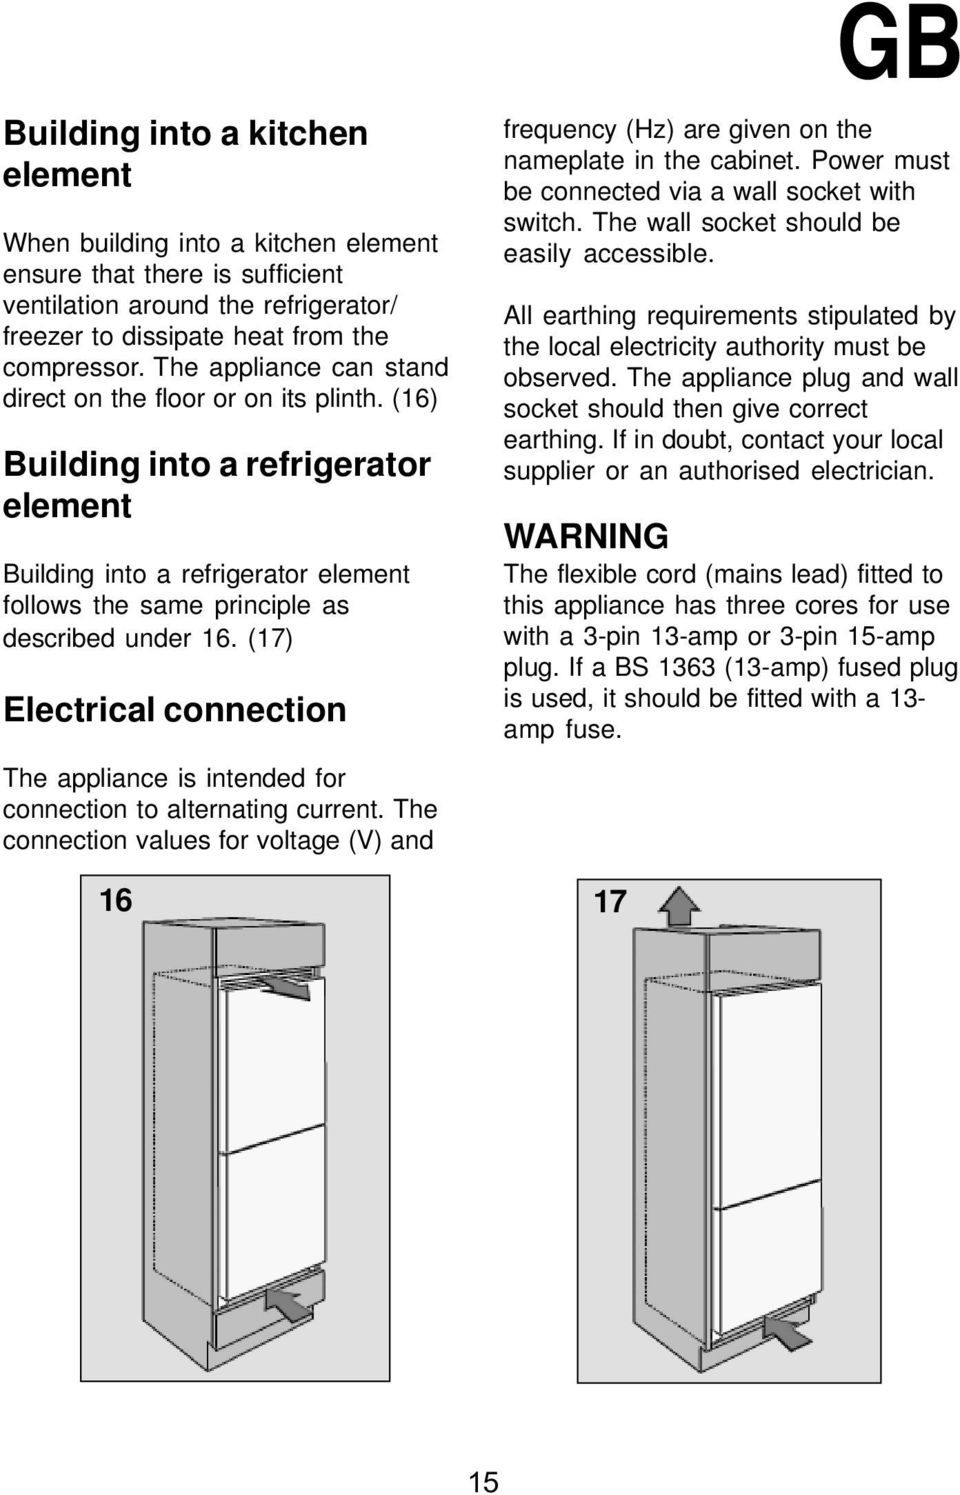 (17) Electrical connection The appliance is intended for connection to alternating current. The connection values for voltage (V) and GB frequency (Hz) are given on the nameplate in the cabinet.